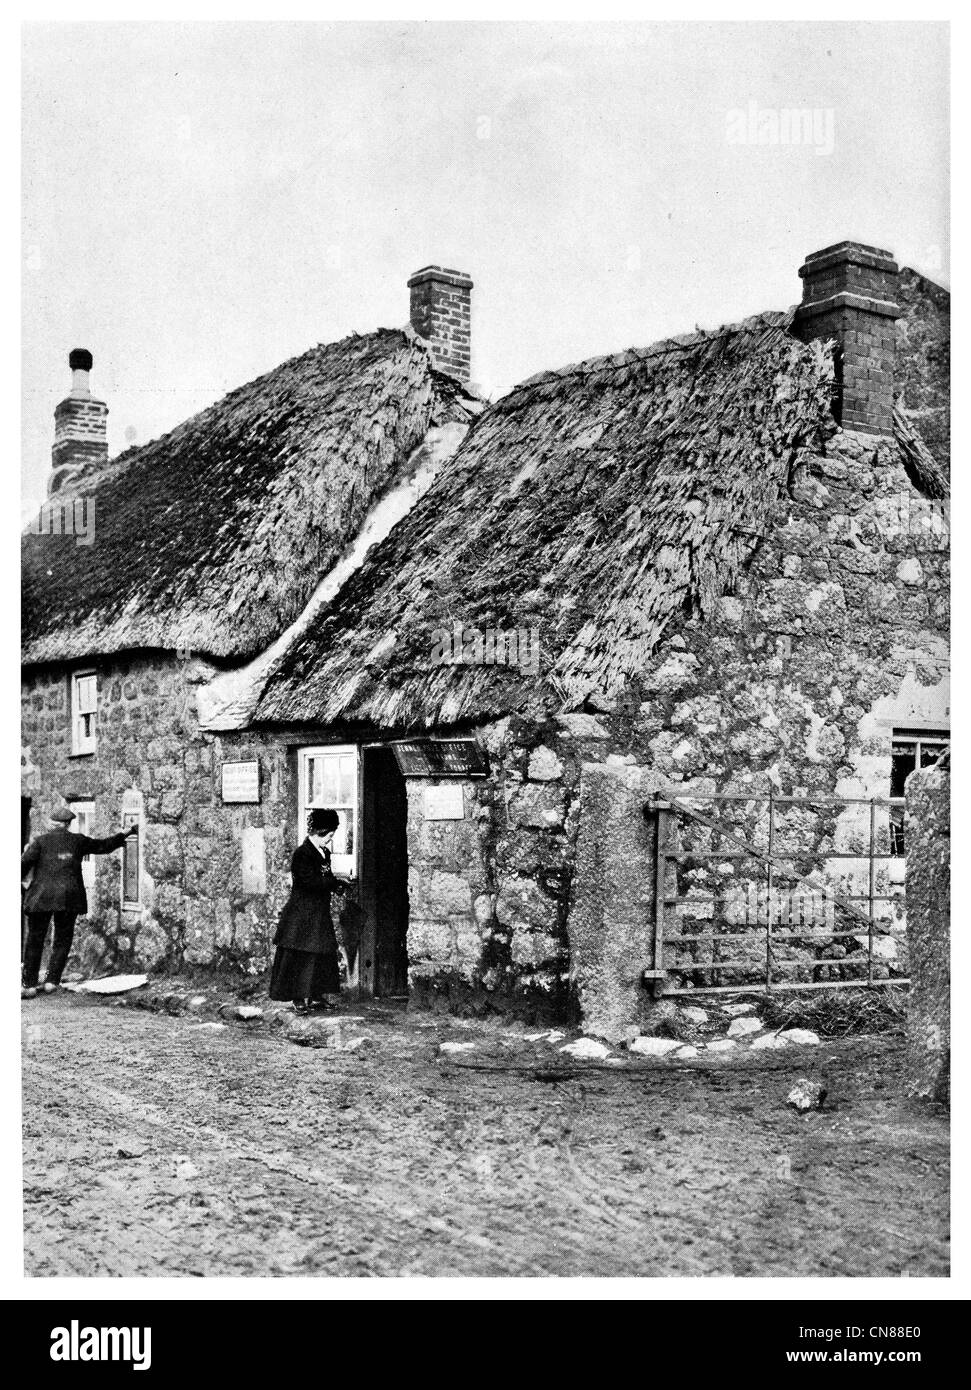 First published 1915 Post Office in England Thatch roof Lands End England UK GB EU Europe Stock Photo